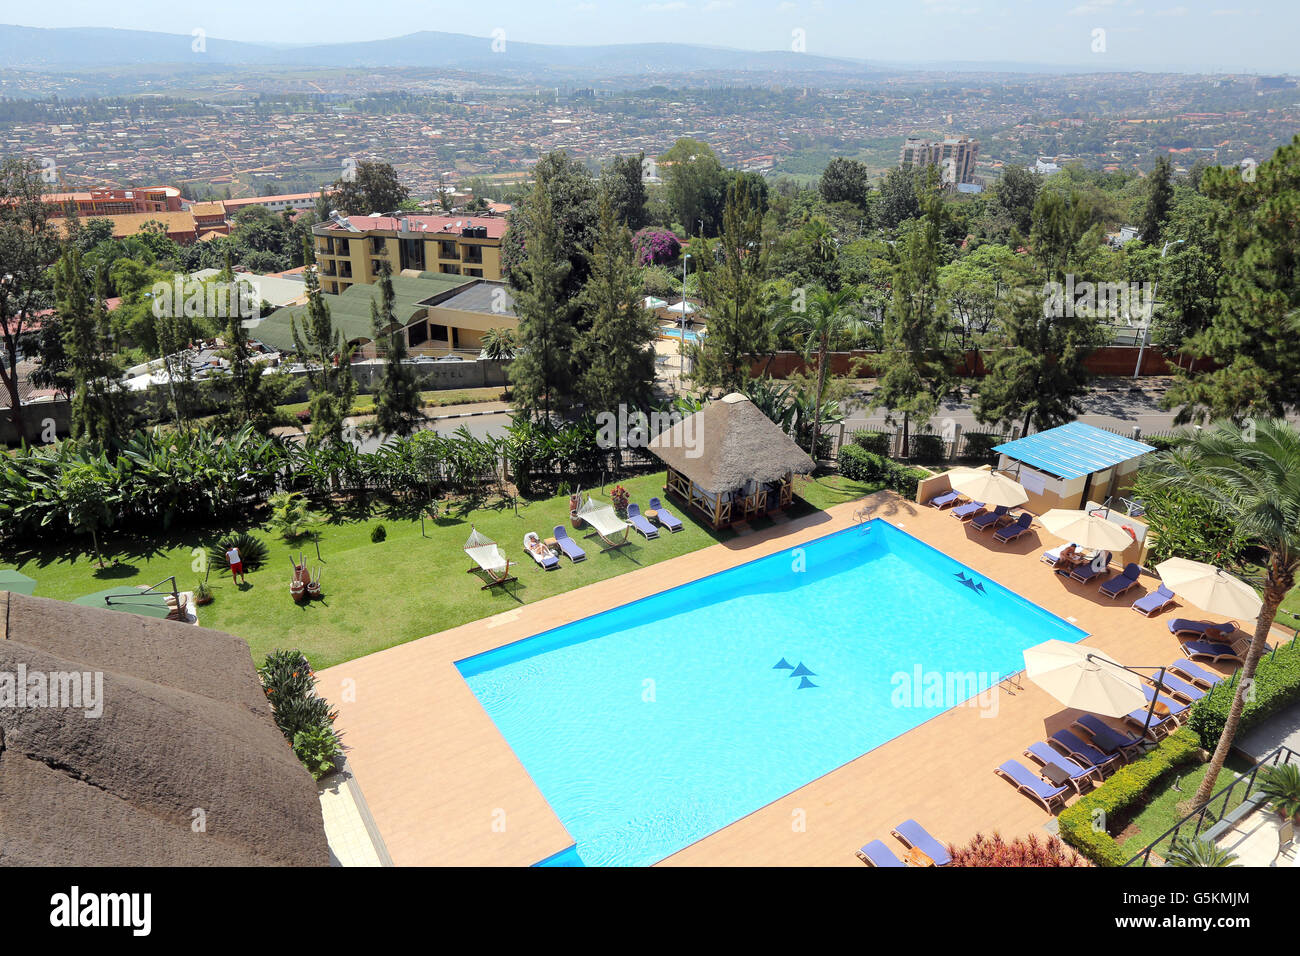 Kigali, Rwanda, Africa -  View from top of the 'Hôtel des Mille Collines' to the pool site and garden of the Hotel. Hôtel des Mille Collines made famous in the movie 'Hotel Rwanda', it is the place where terrified Tutsi's took refuge during the 1994 genocide. Stock Photo